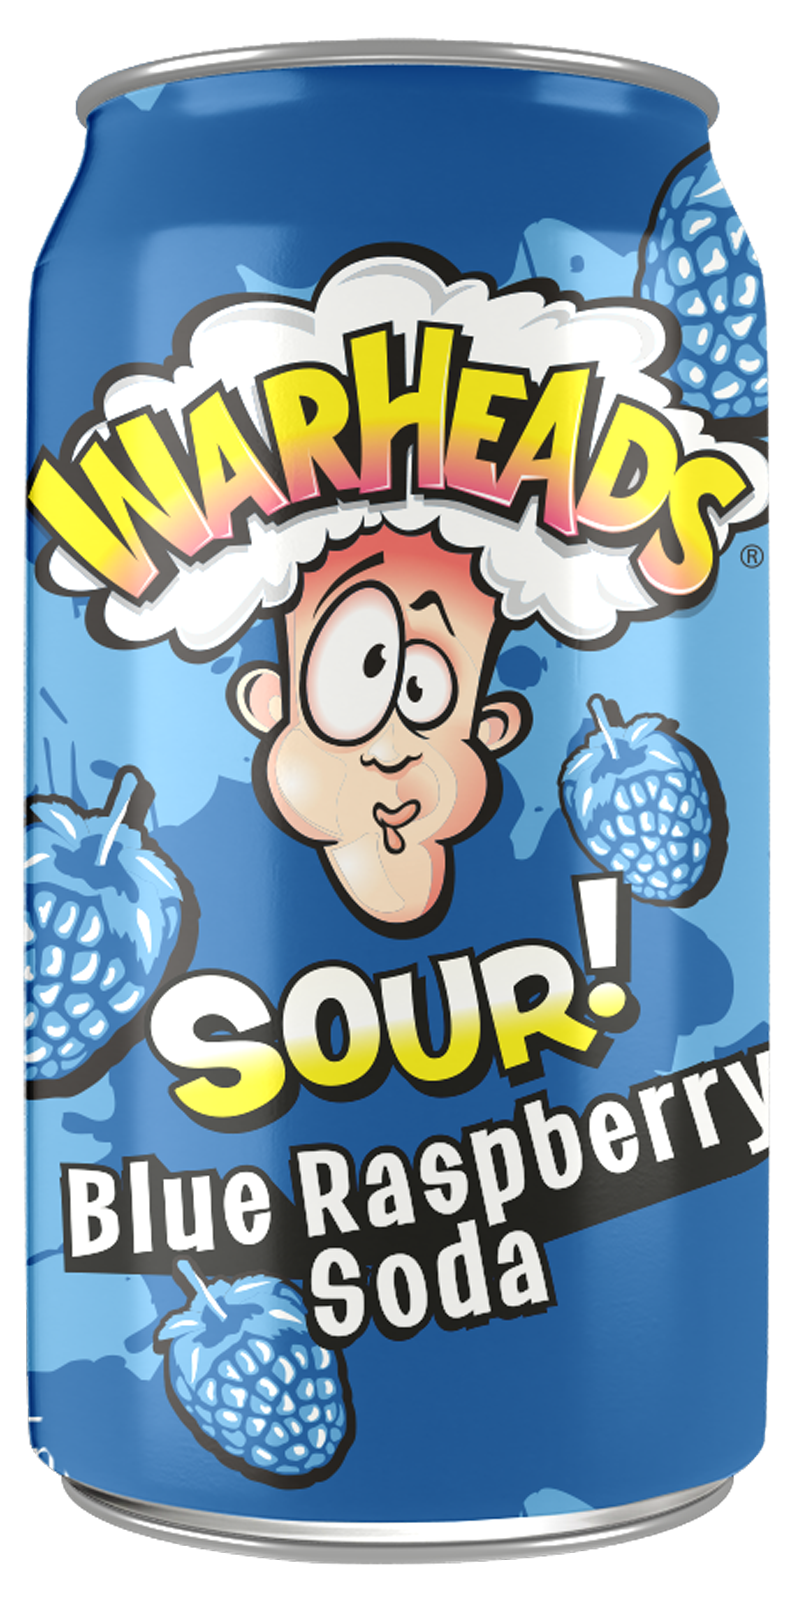 Warheads Sour Soda officially lands in the UK